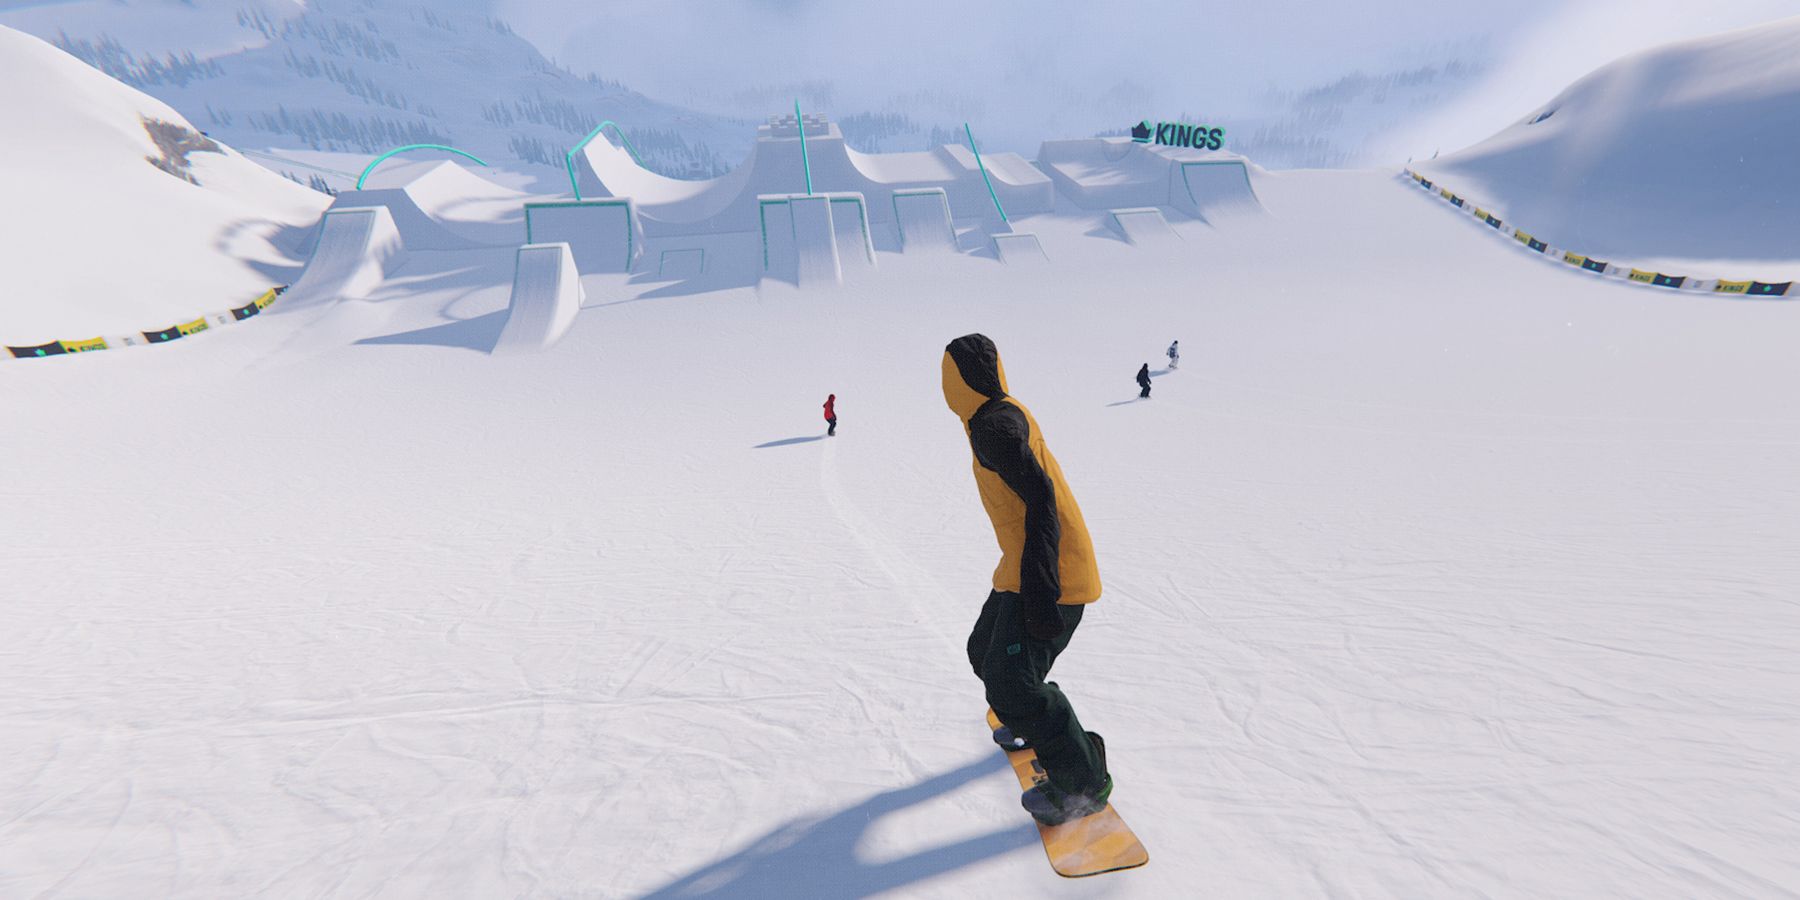 Shredders snowboard slope and jumps